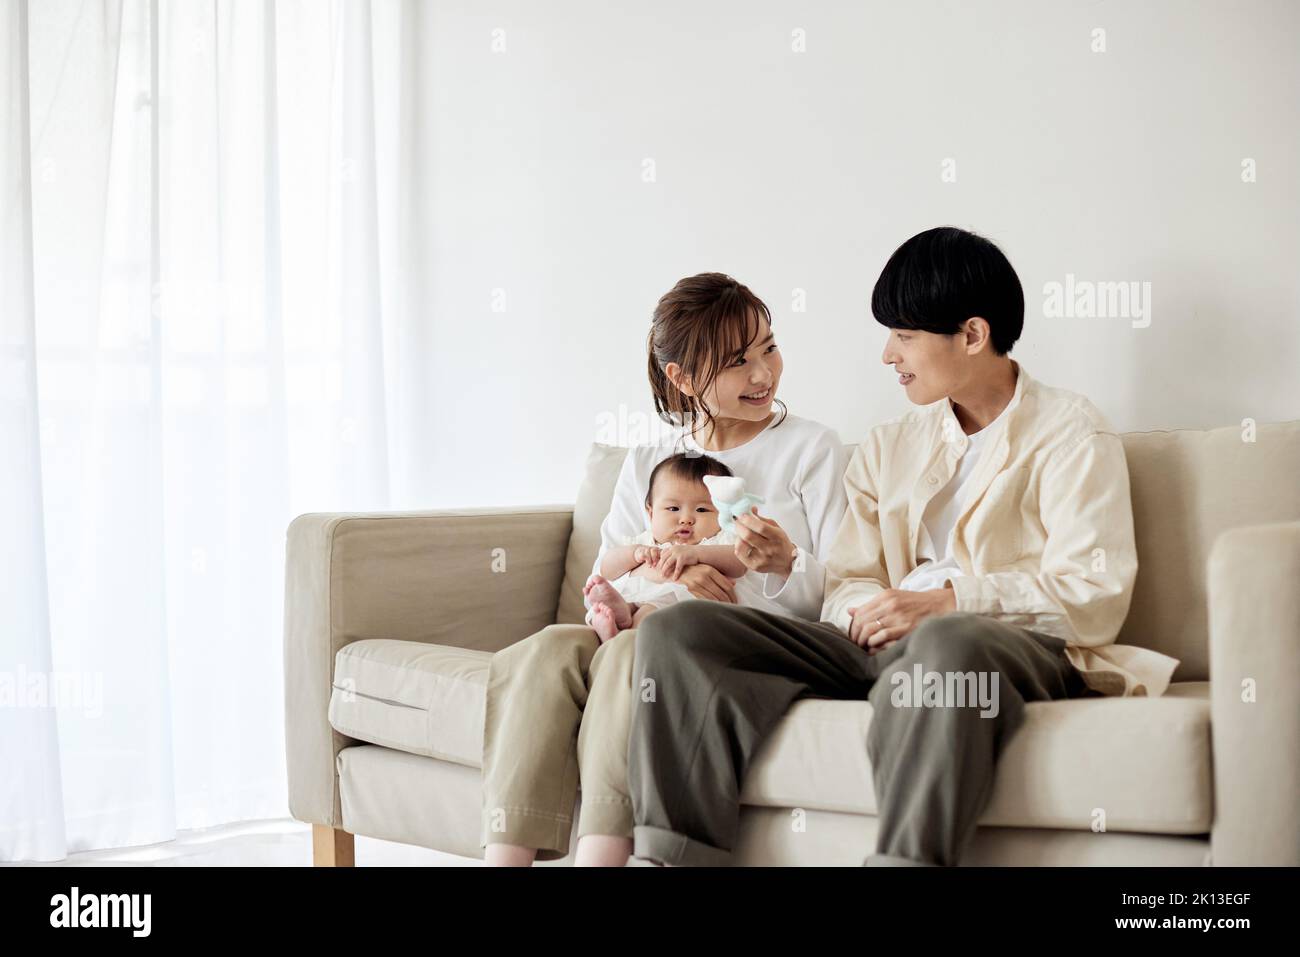 Japanese newborn with mother and father Stock Photo